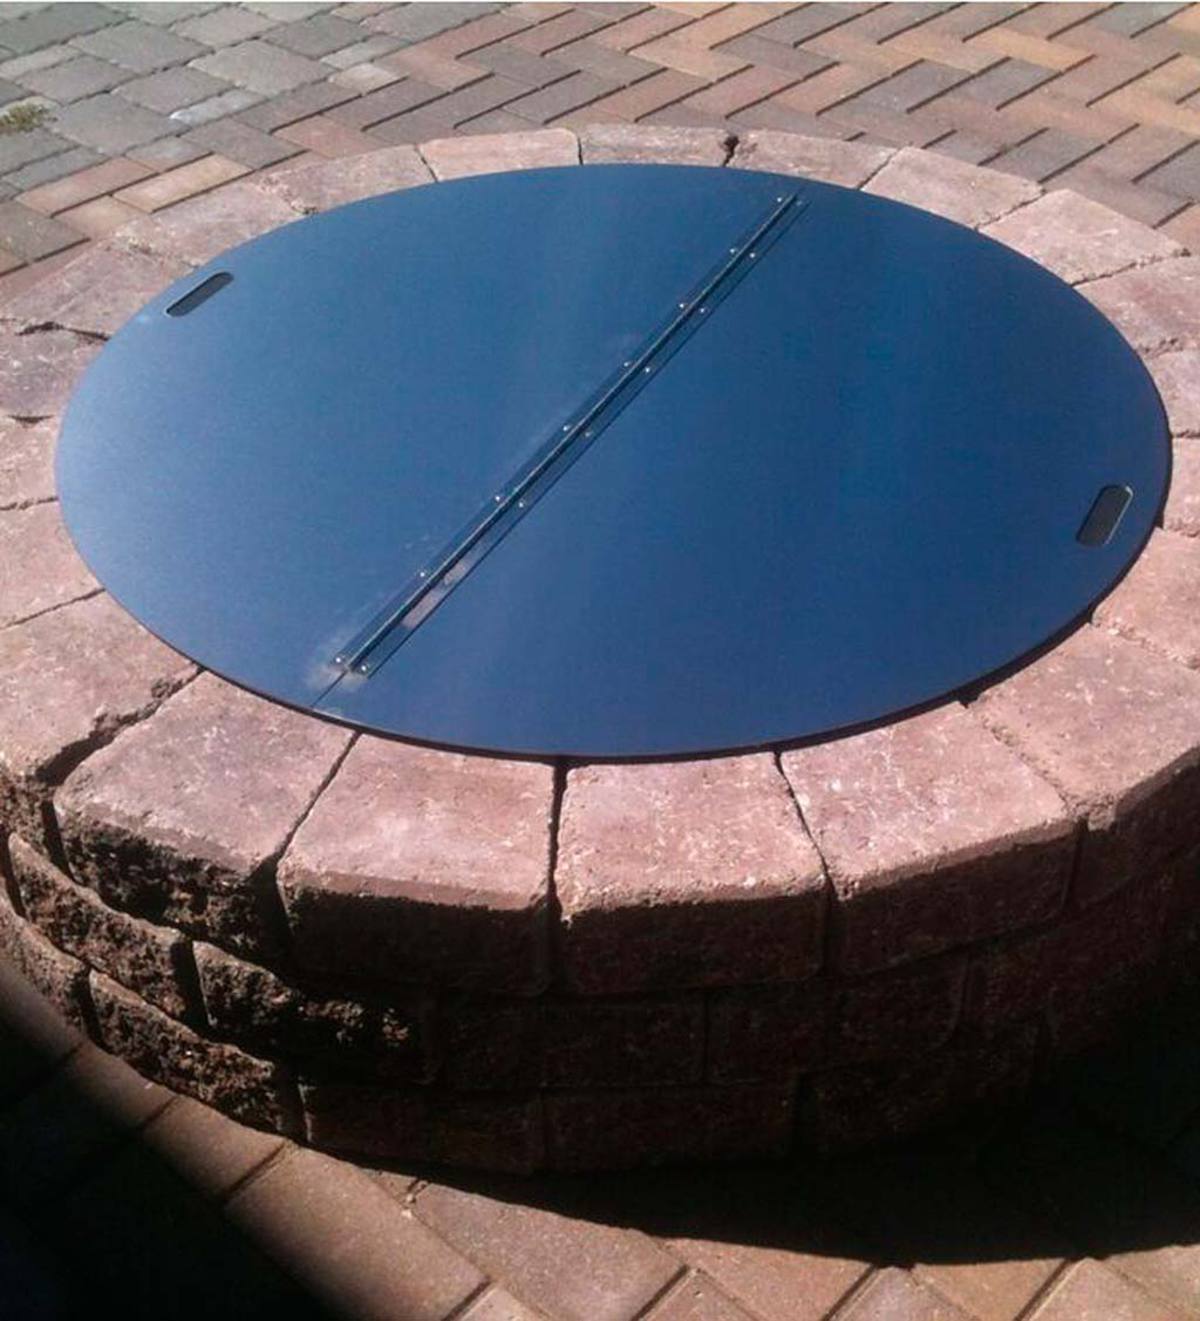 Stainless Steel Round Fire Pit Cover, 32 Inch Round Metal Fire Pit Cover